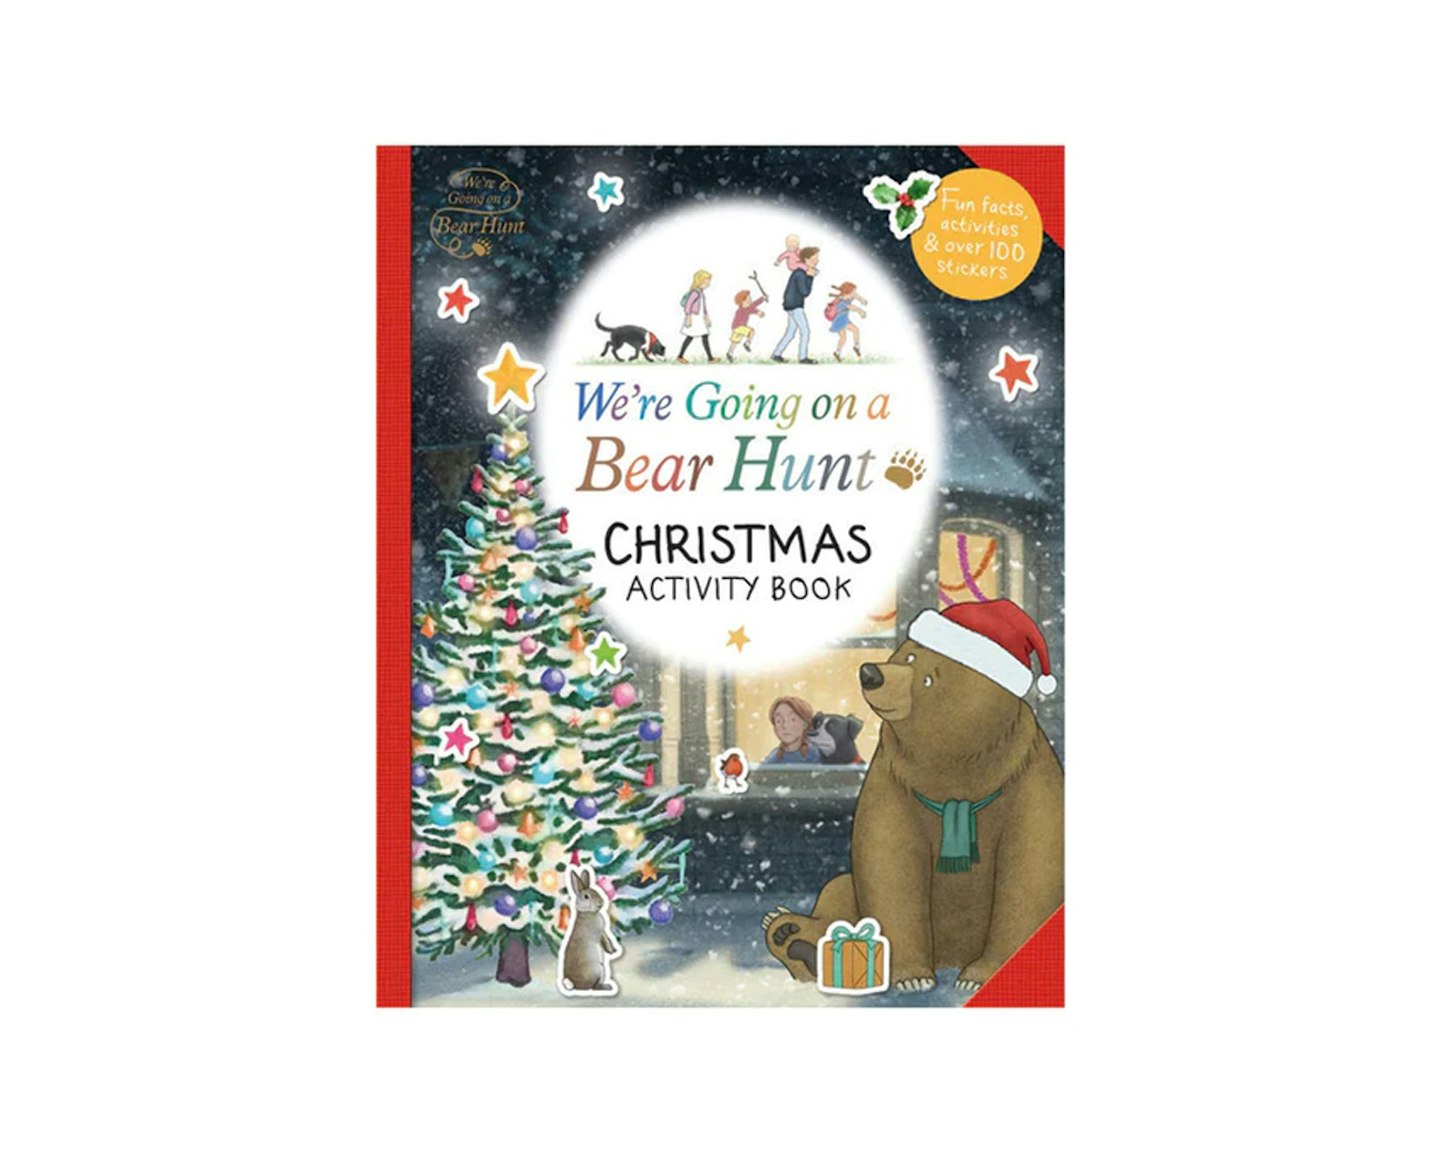 We're Going on a Bear Hunt Christmas Activity Book